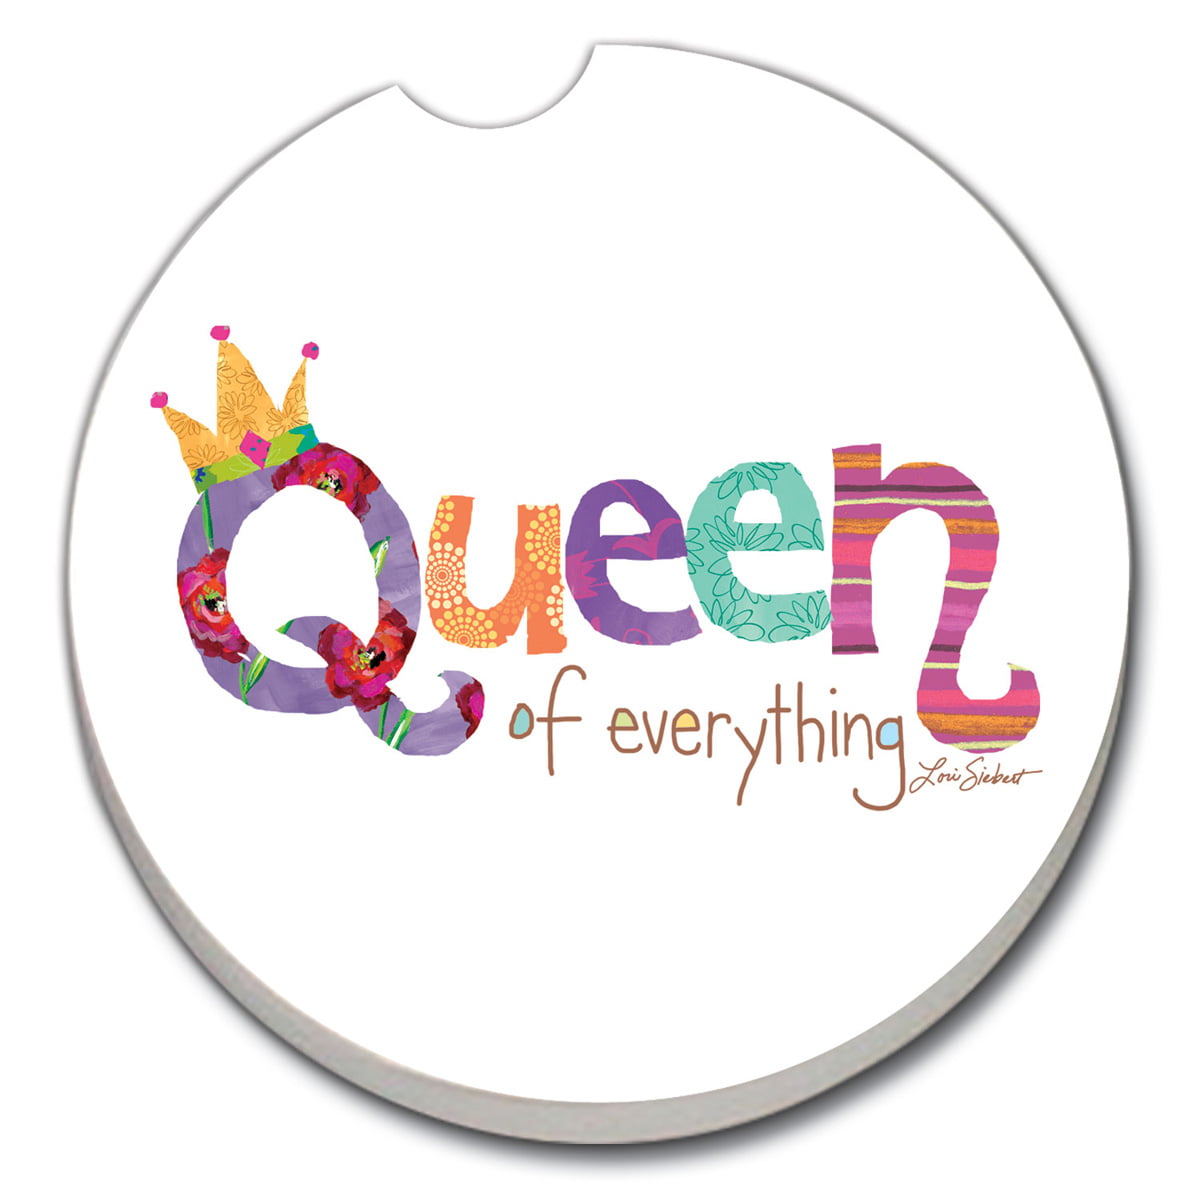 King And Queen Car Coasters For Vehicle Cup Holders Set Of 2 